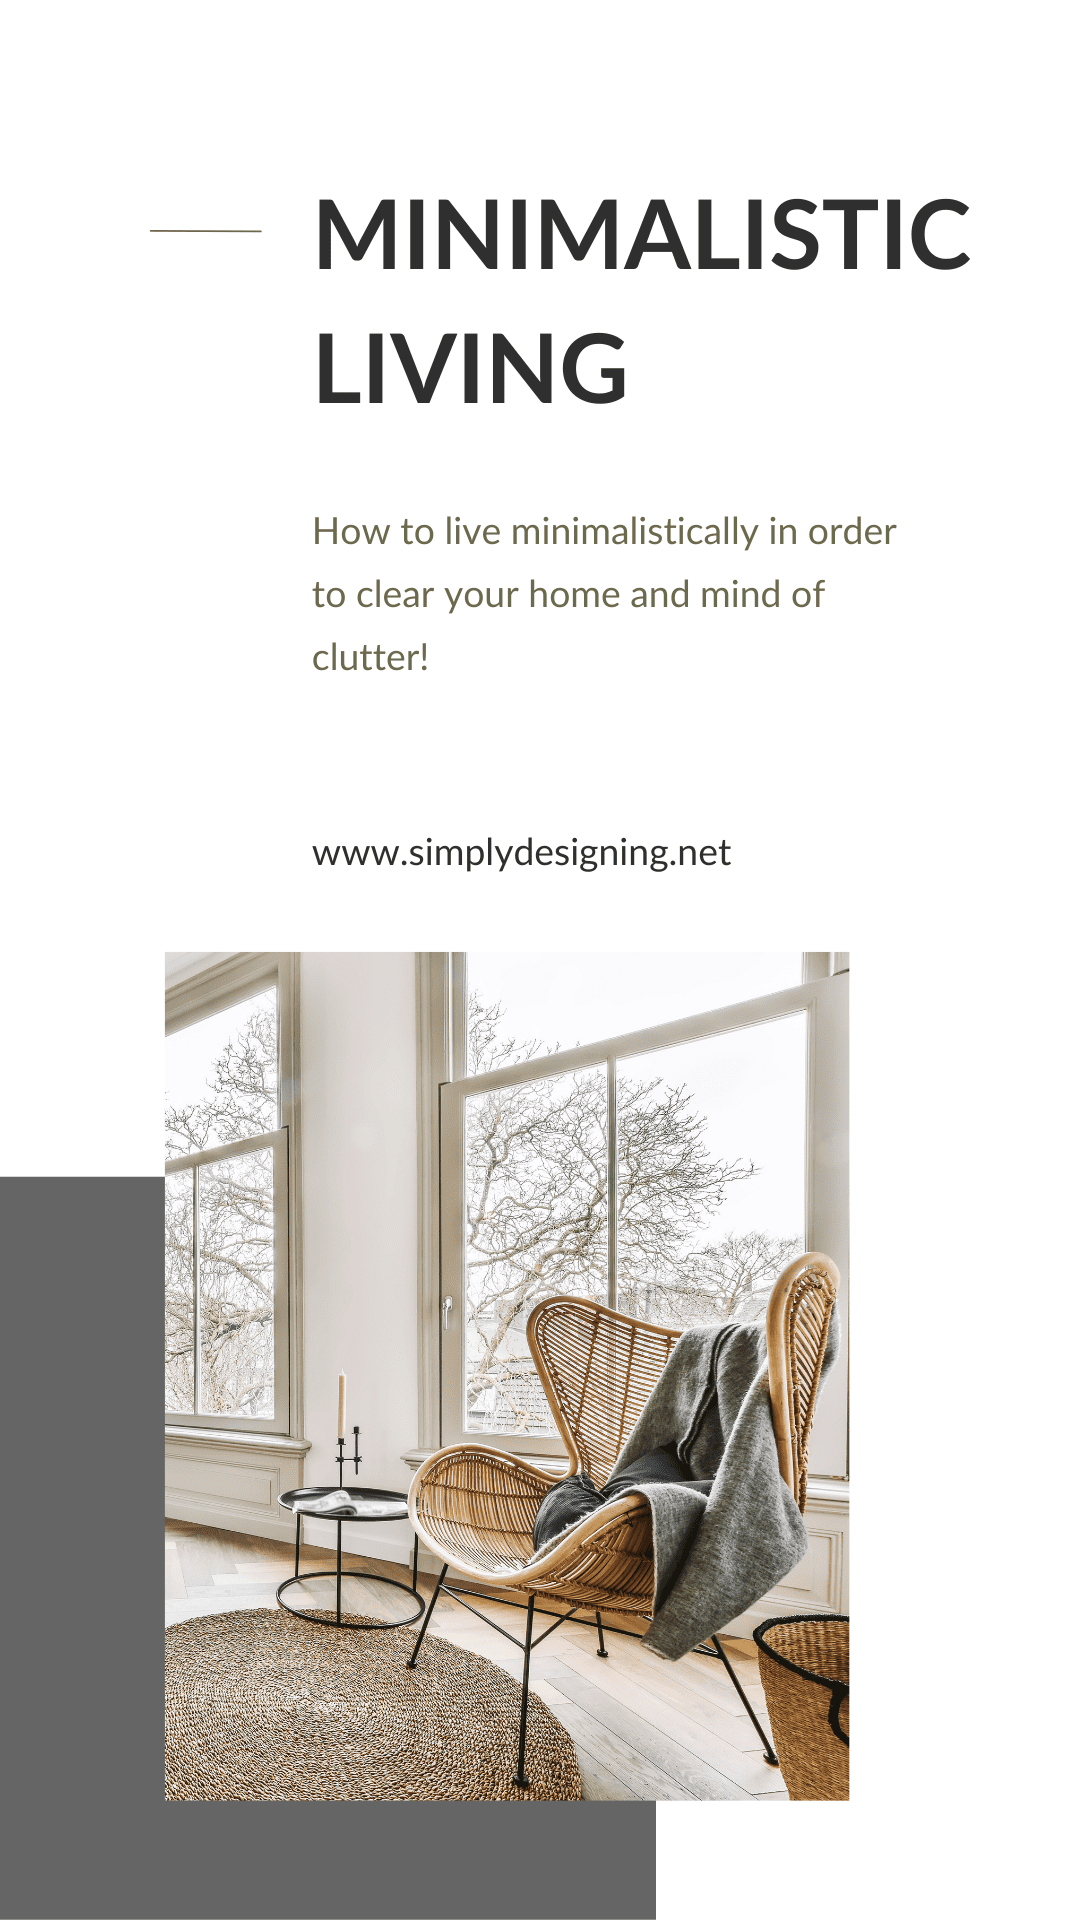 white background with black text saying minimalist living with picture of a minimalist living room with a chair